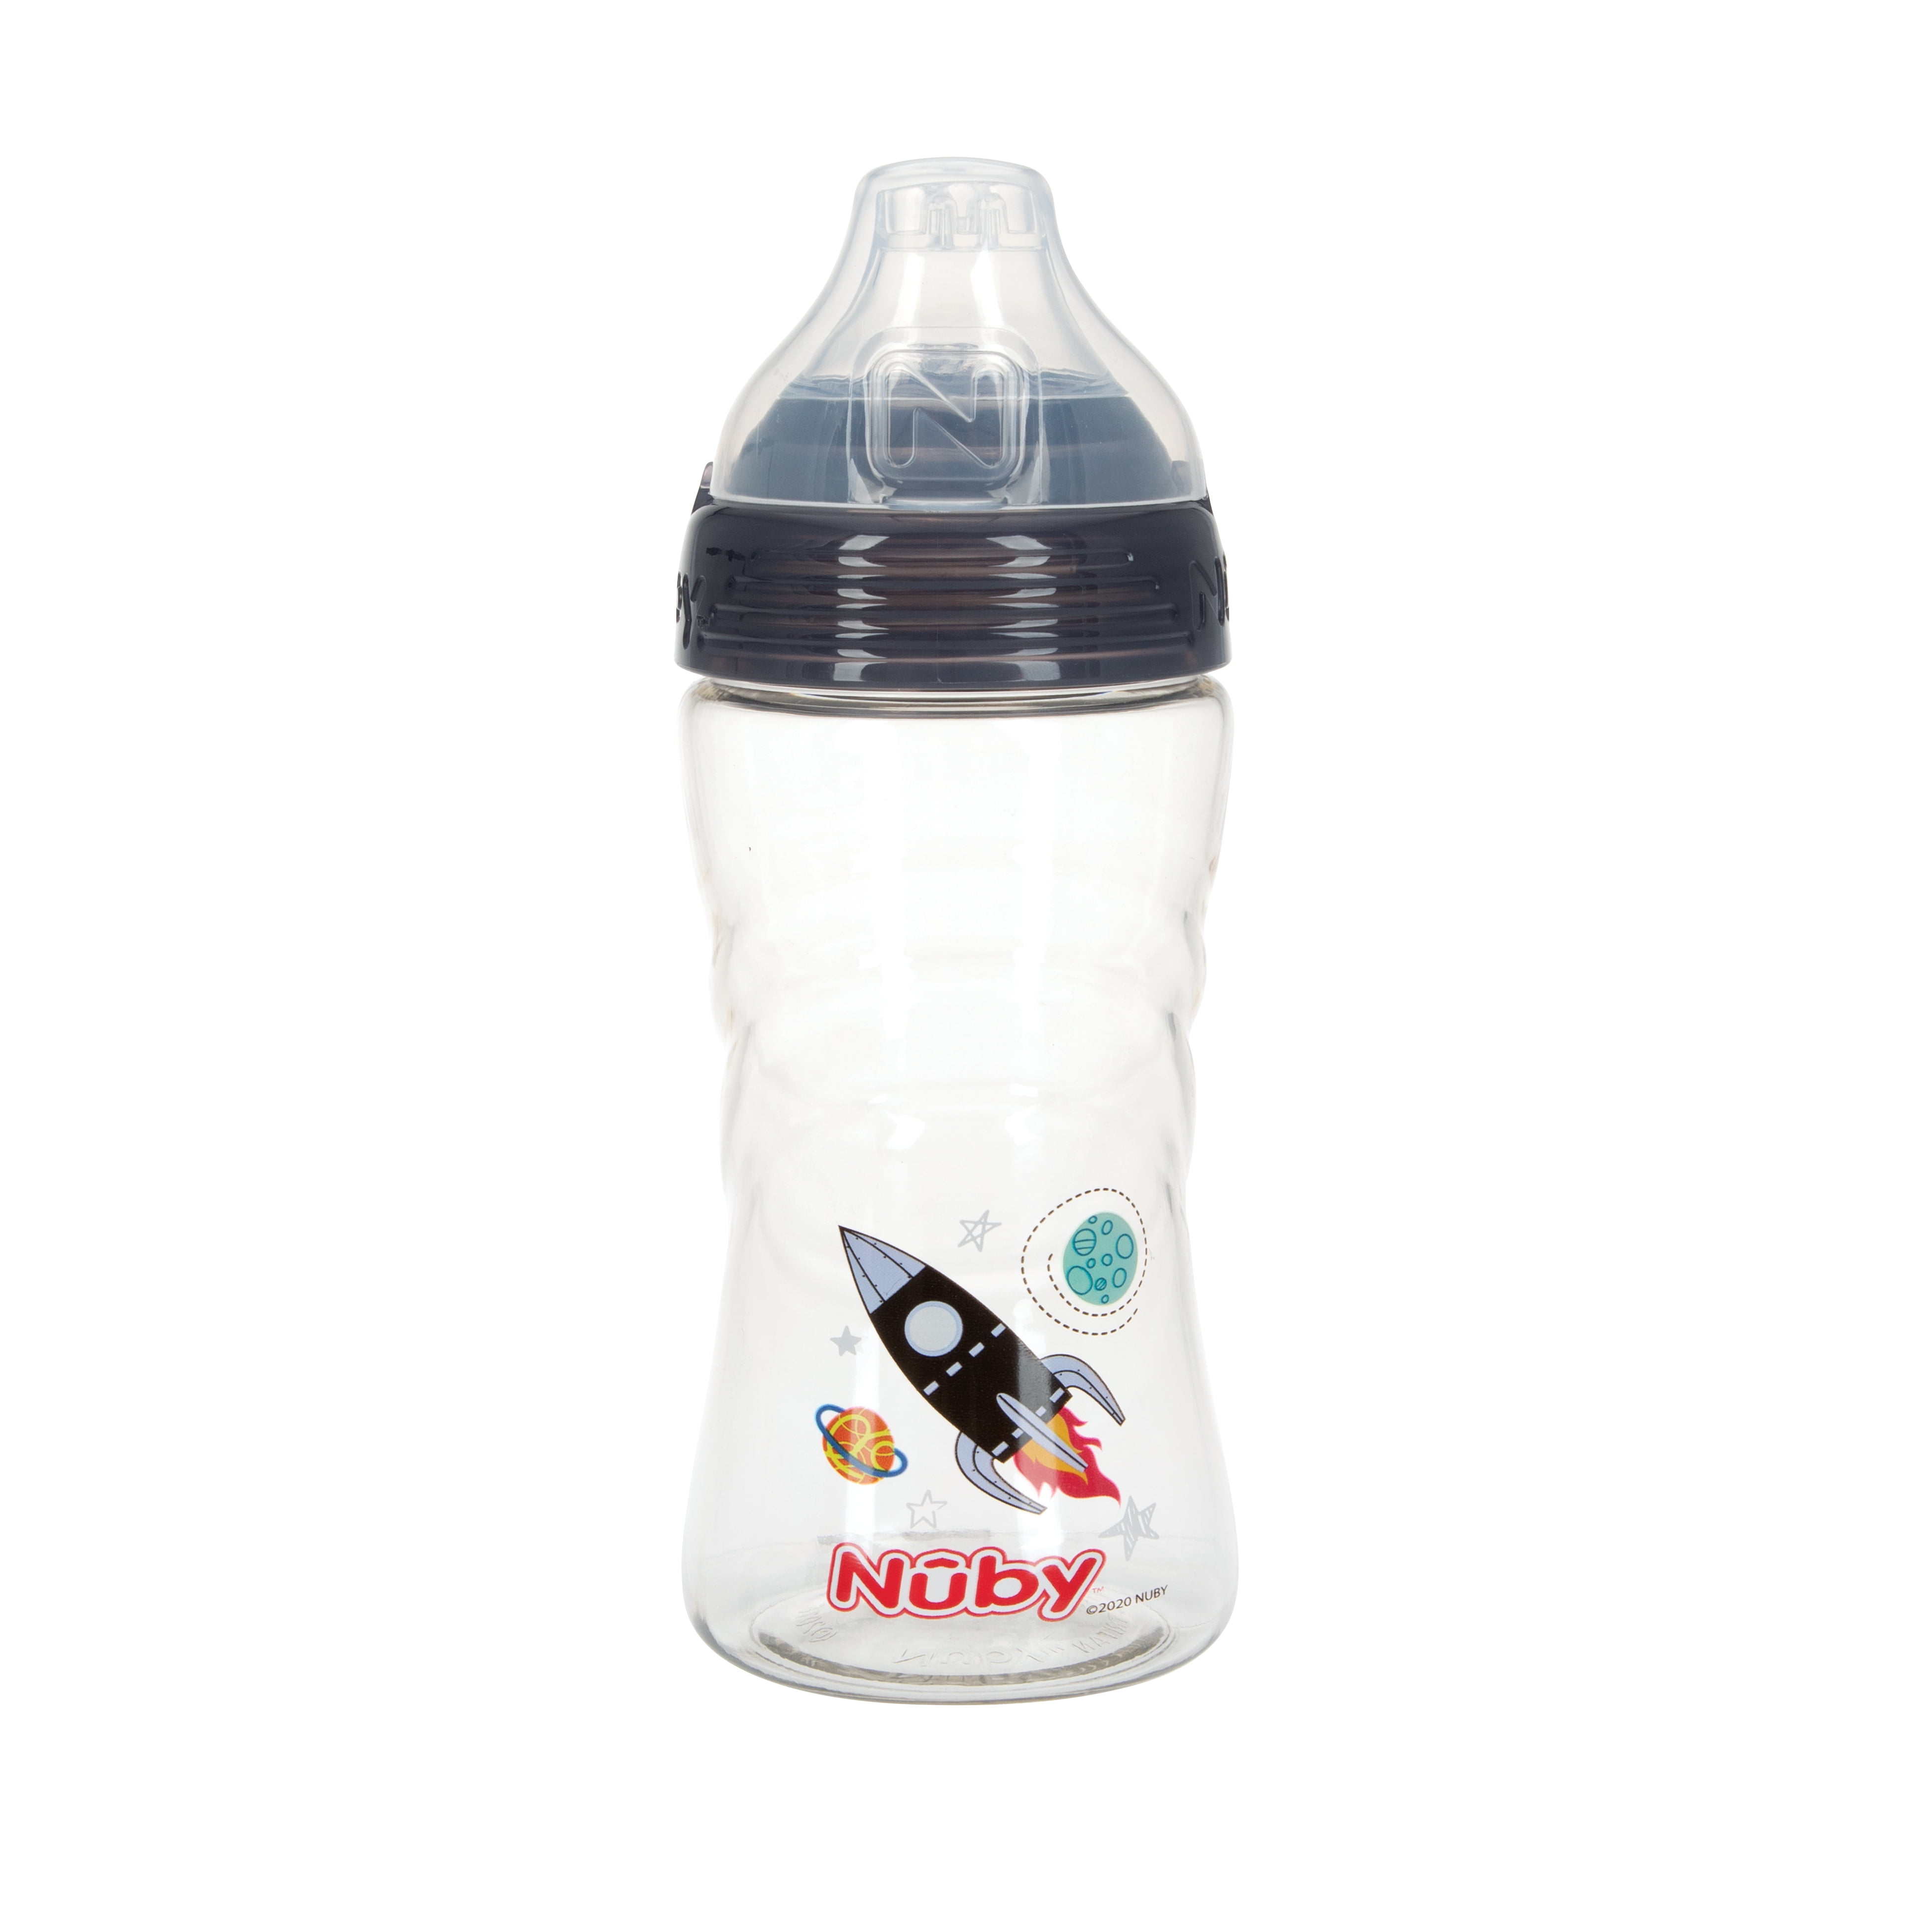 Nuby Thirsty Kids Sport 12oz Rocket Sippy Cup with Silicone Spout